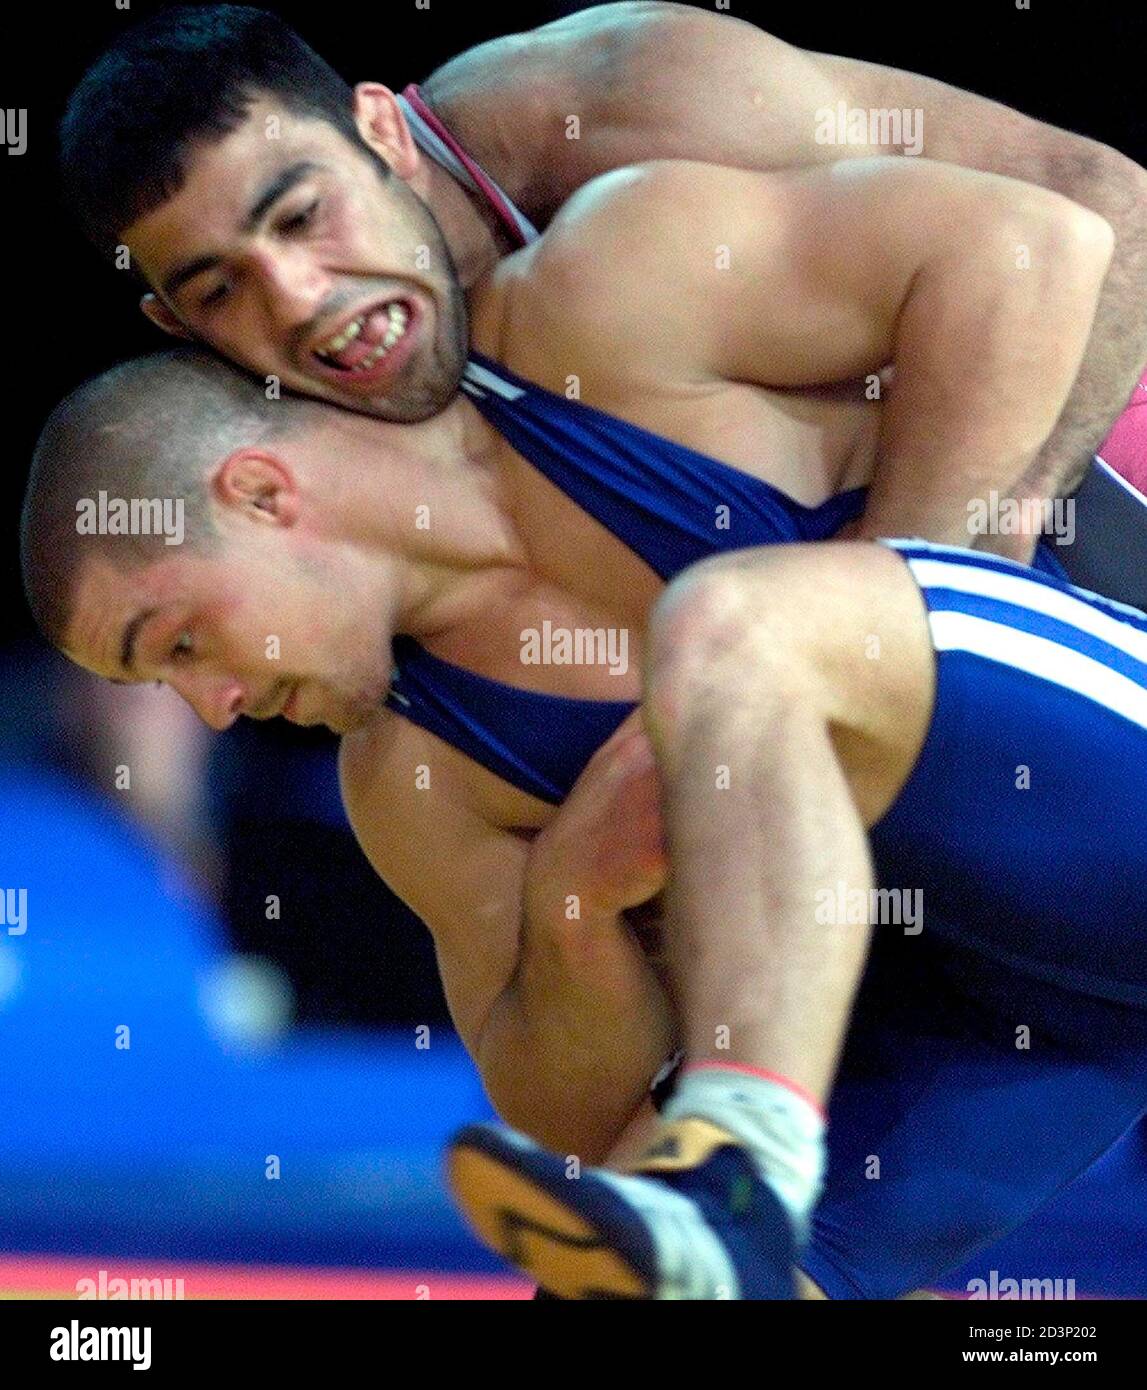 Turkey's Hamza Yerlikaya (top) and Sandor Istvan Bardosi of Hungary compete  in the Greco-Roman 85 kg wrestling class gold medal match at the Olympic  Games in Sydney on September 27, 2000. Yerlikaya